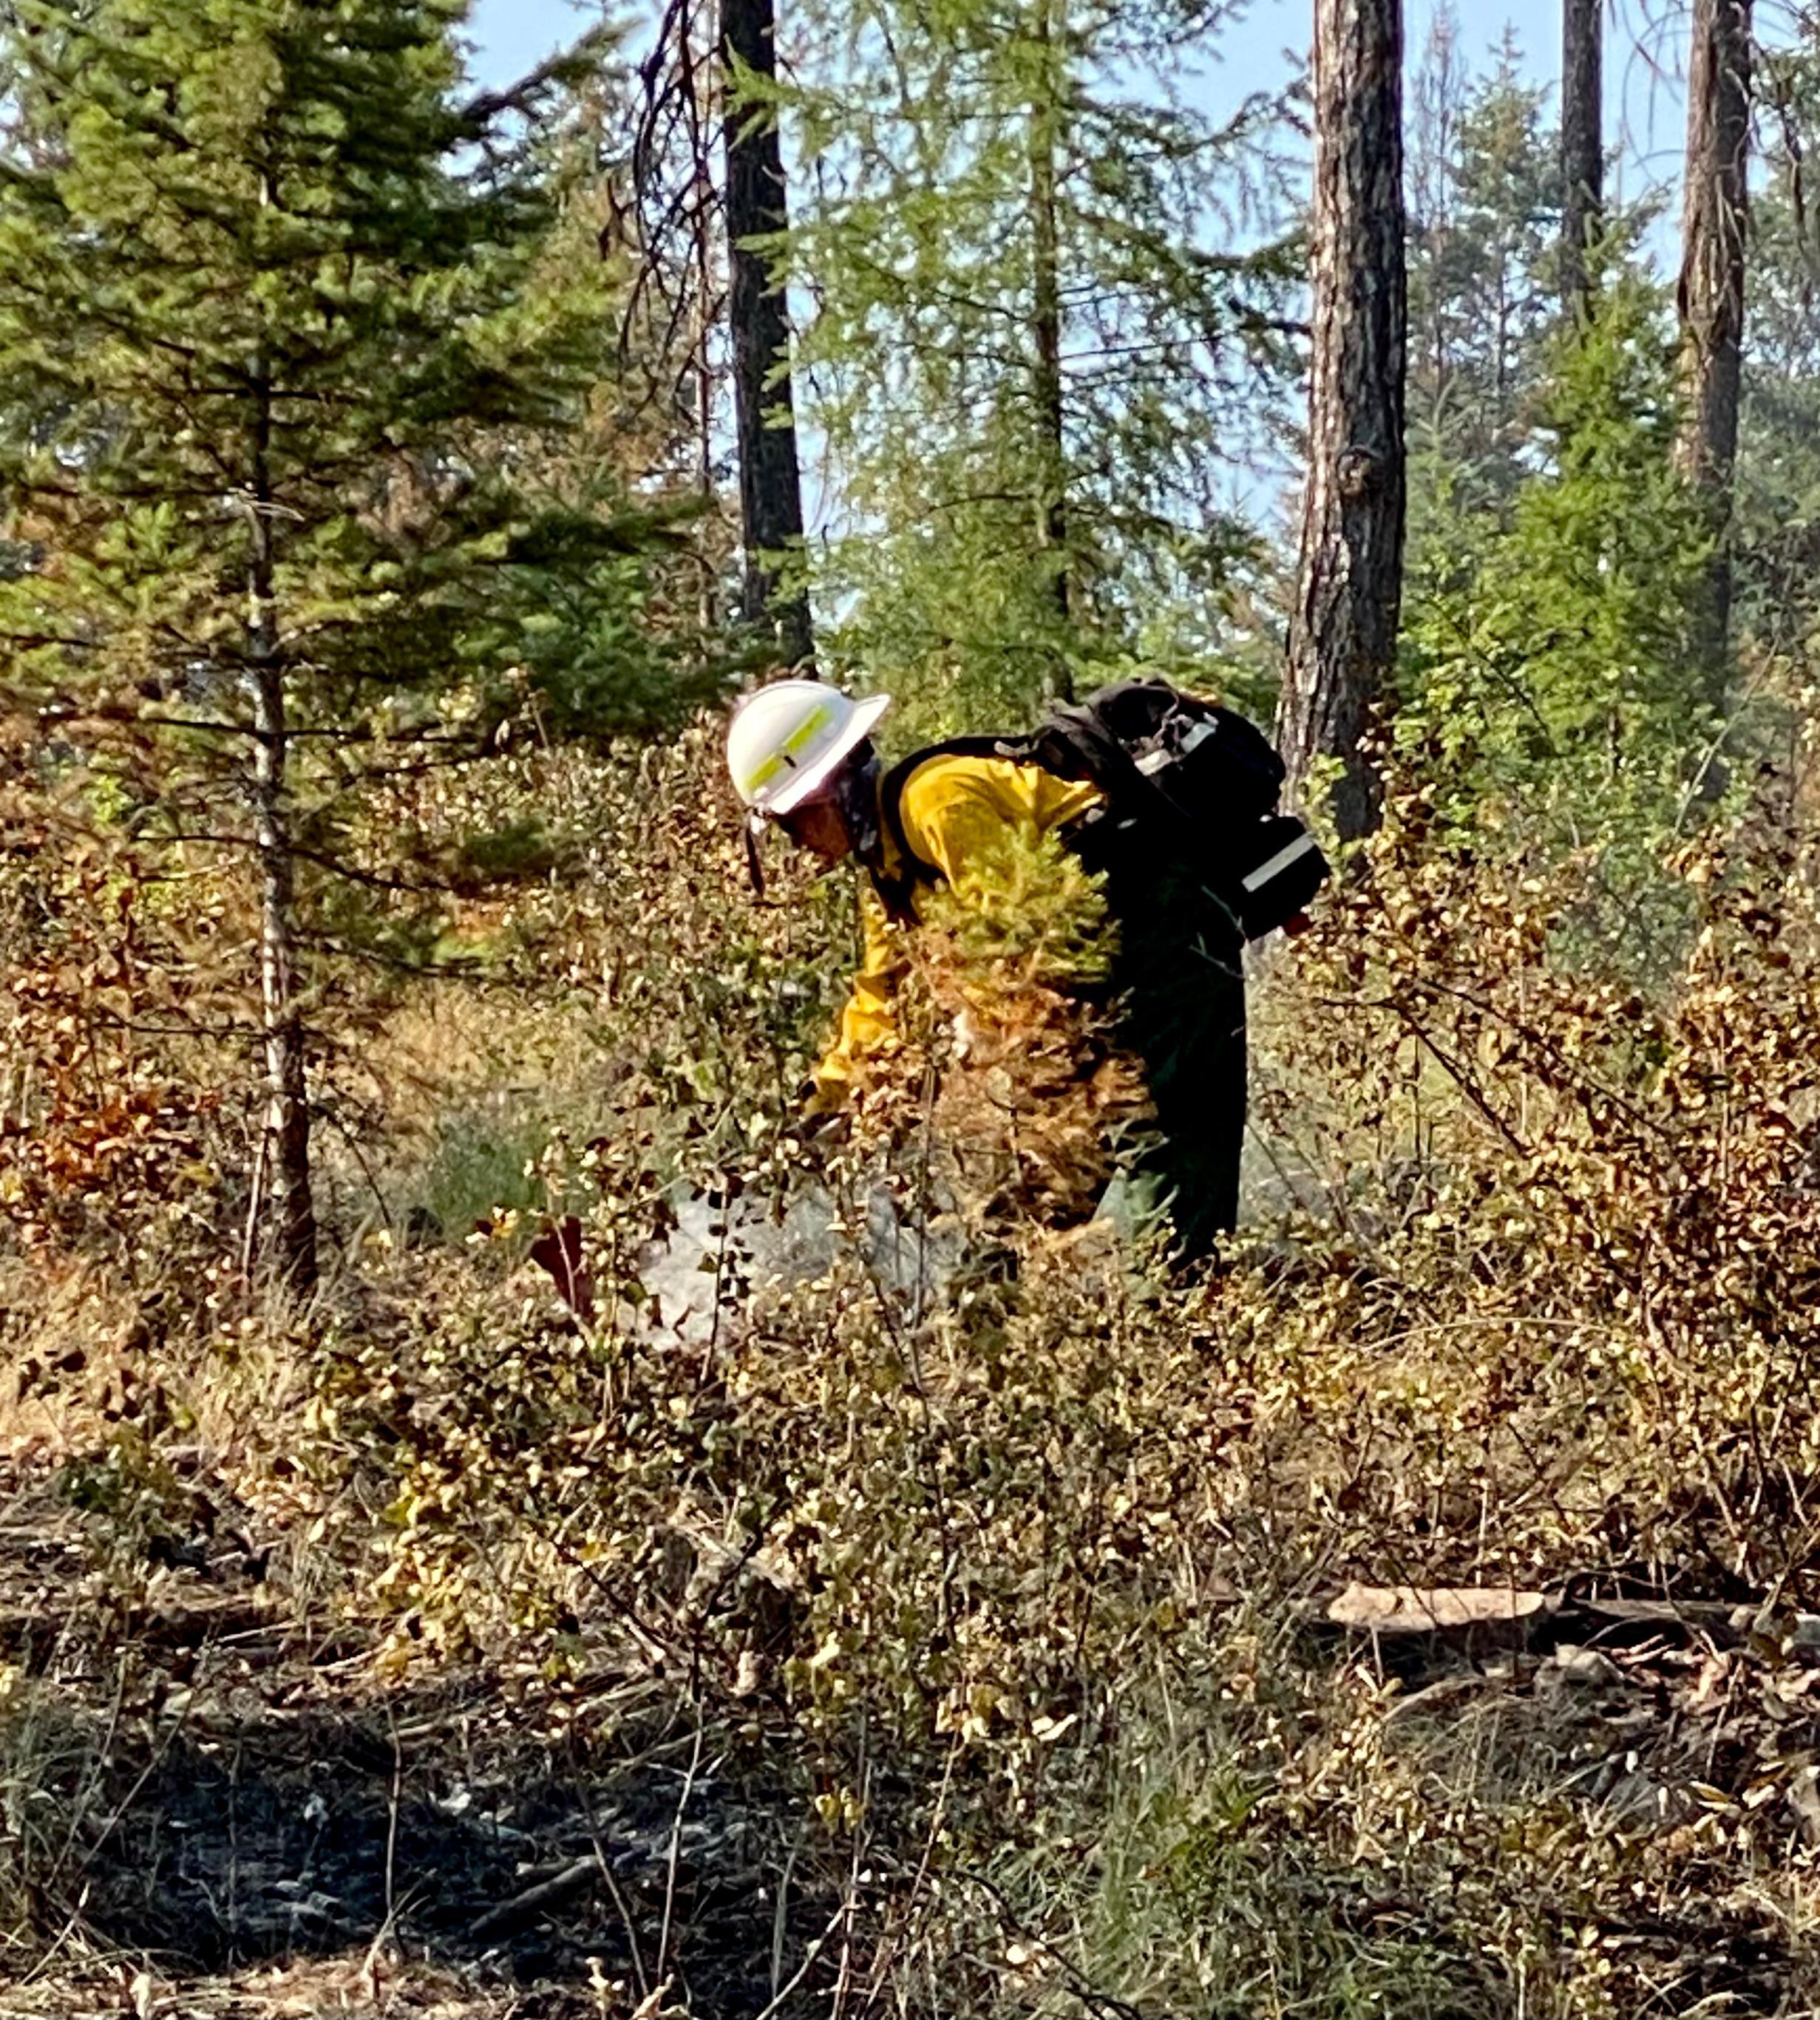 Firefighter from West Coast Reforestation Crew extinguishing areas of heat along the road on the south shore of Lake Mary Ronan, August 7, 2022.